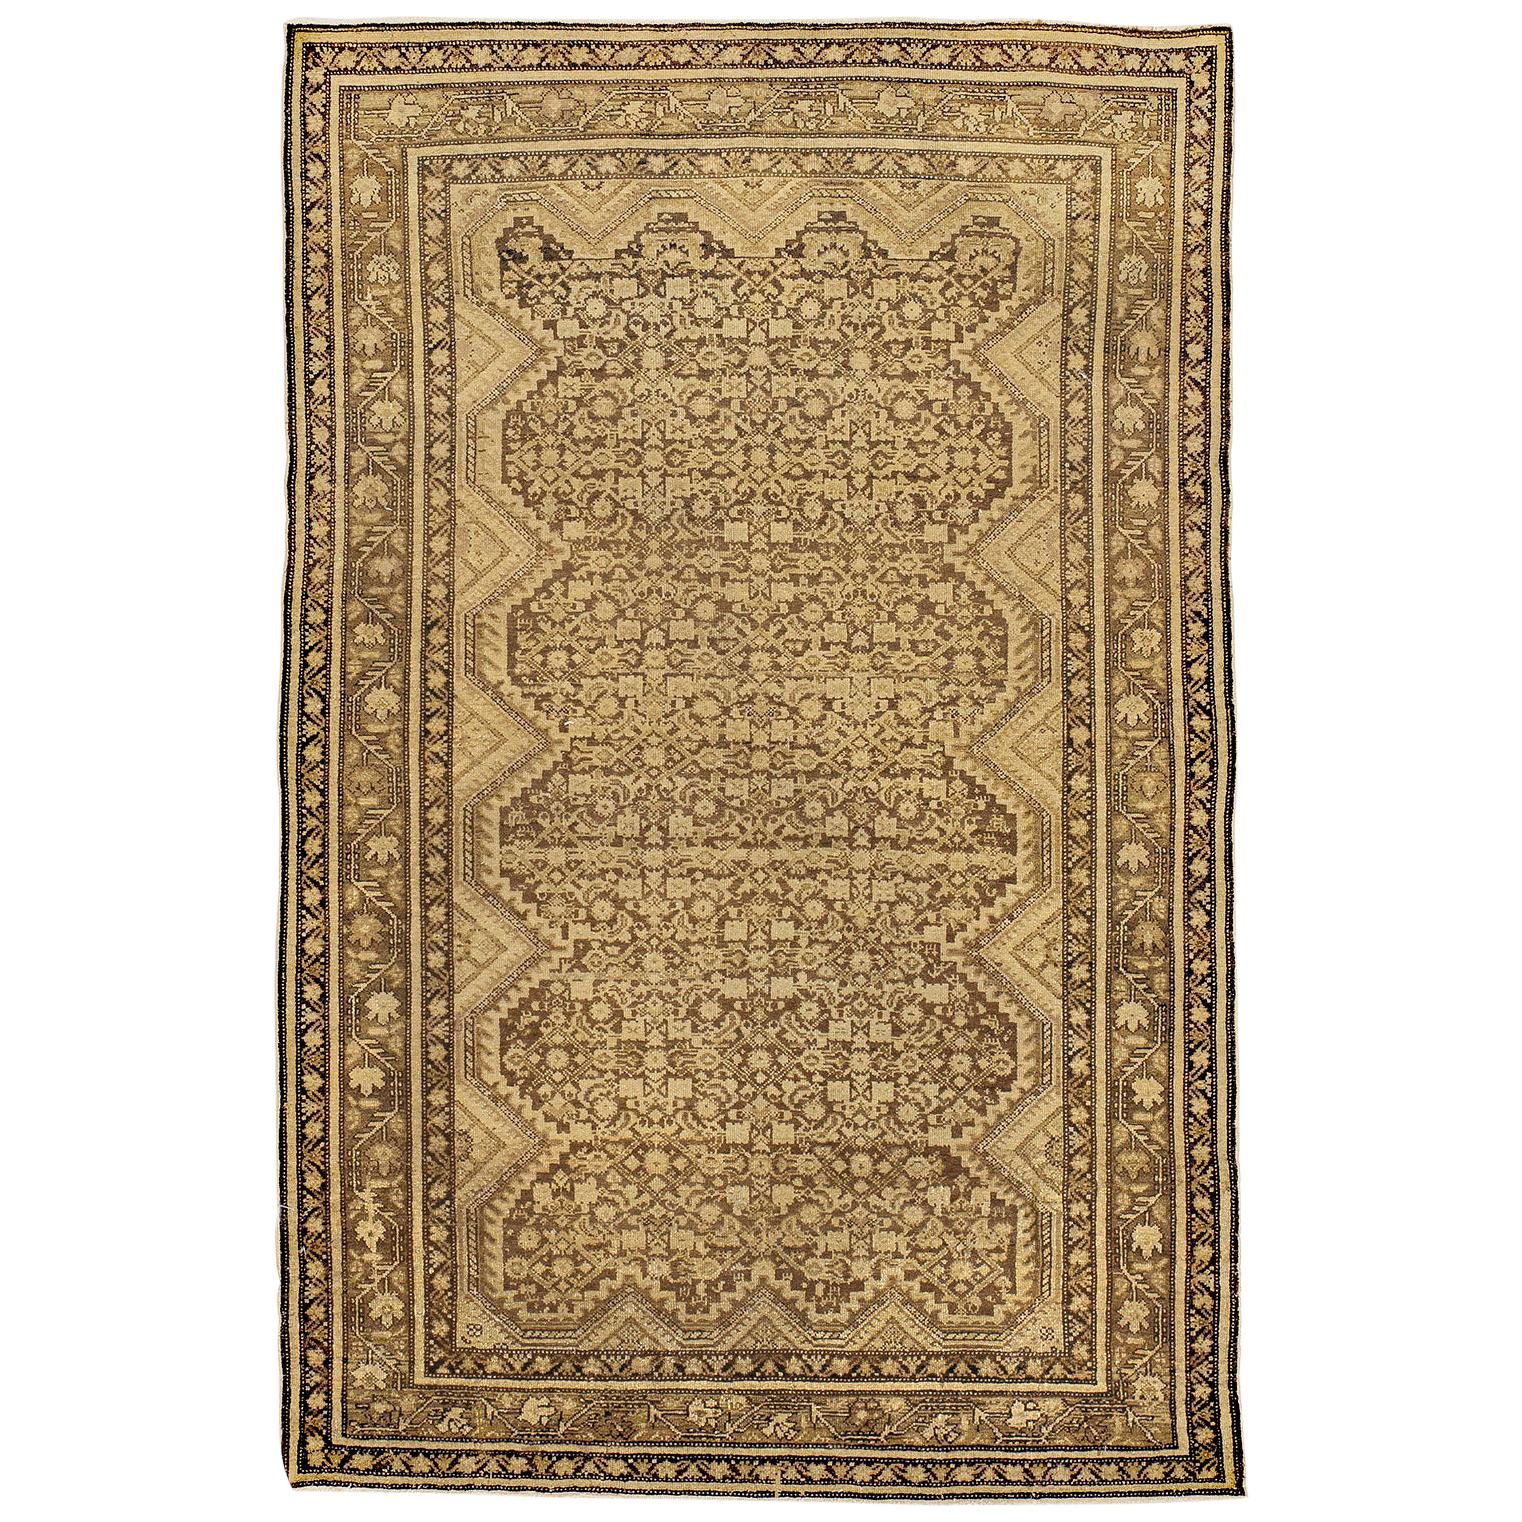 Antique Persian Malayer Rug with Ivory & Beige Botanical Details on Brown Field